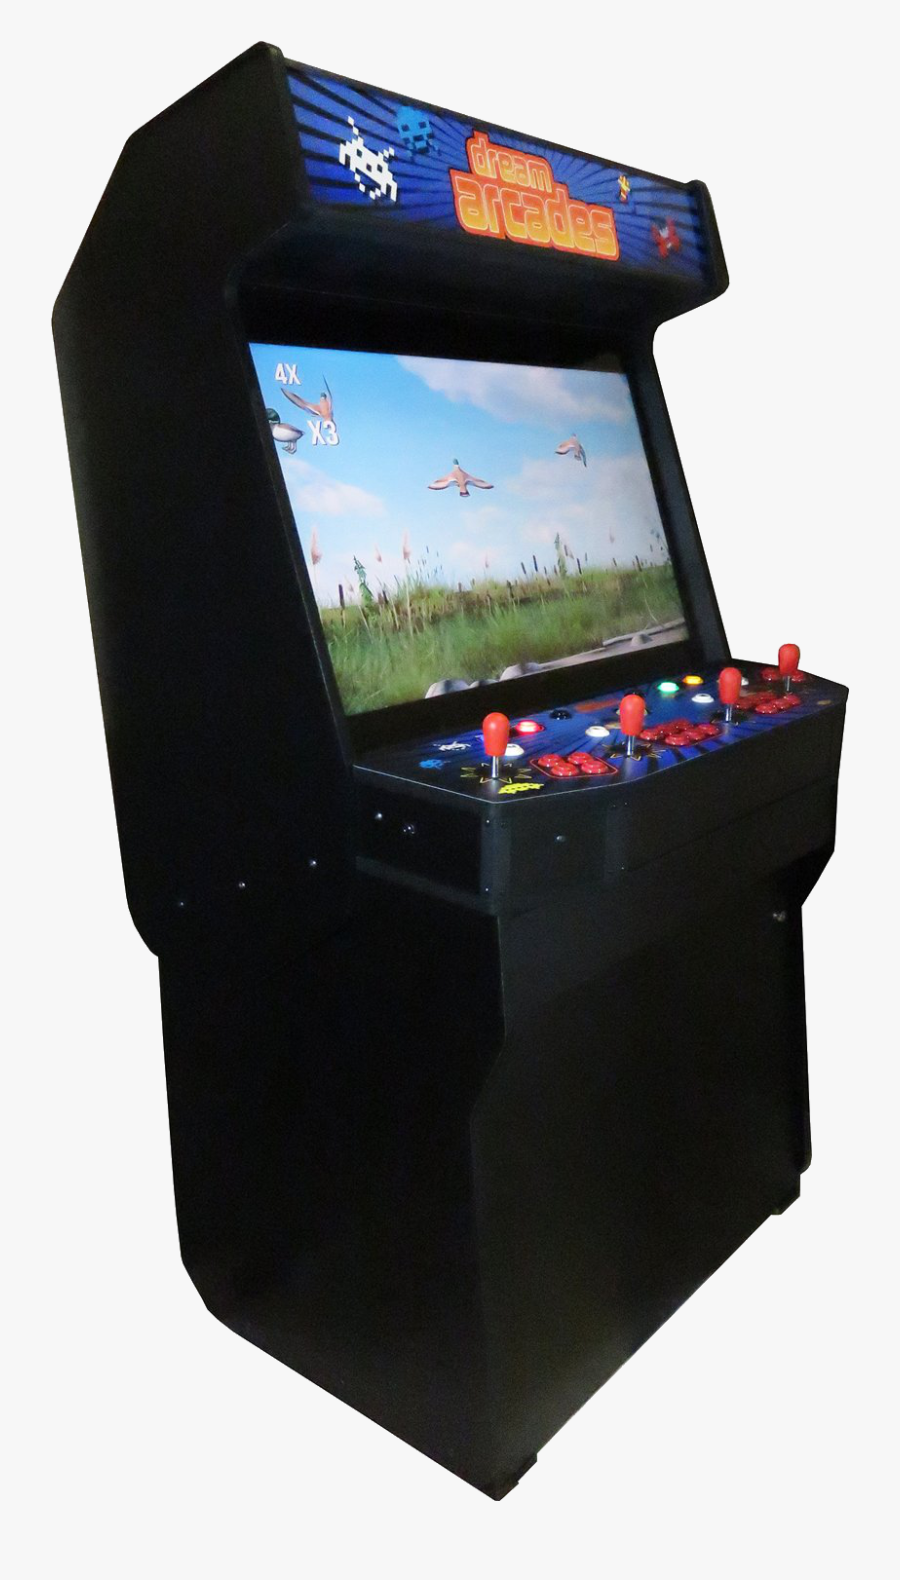 Download Hd Donkey Kong Arcade Png Transparent Png - Video Game Arcade Cabinet, Transparent Clipart